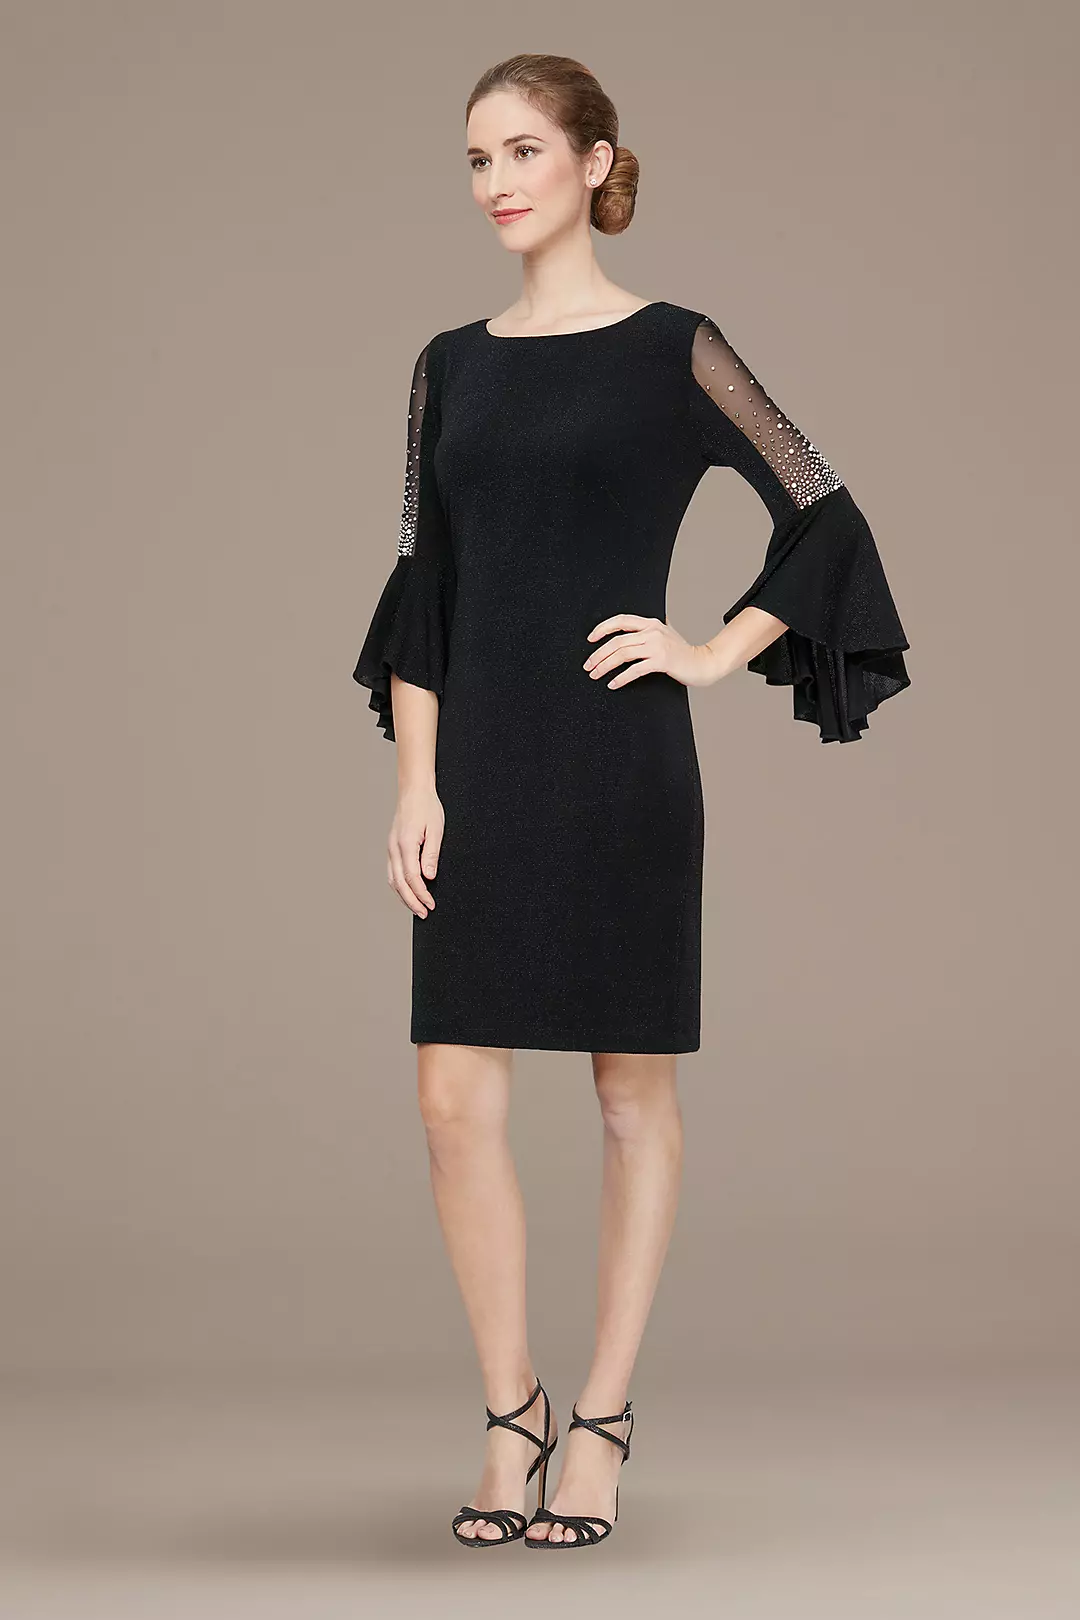 Metallic Knit Dress with Embellished Bell Sleeves Image